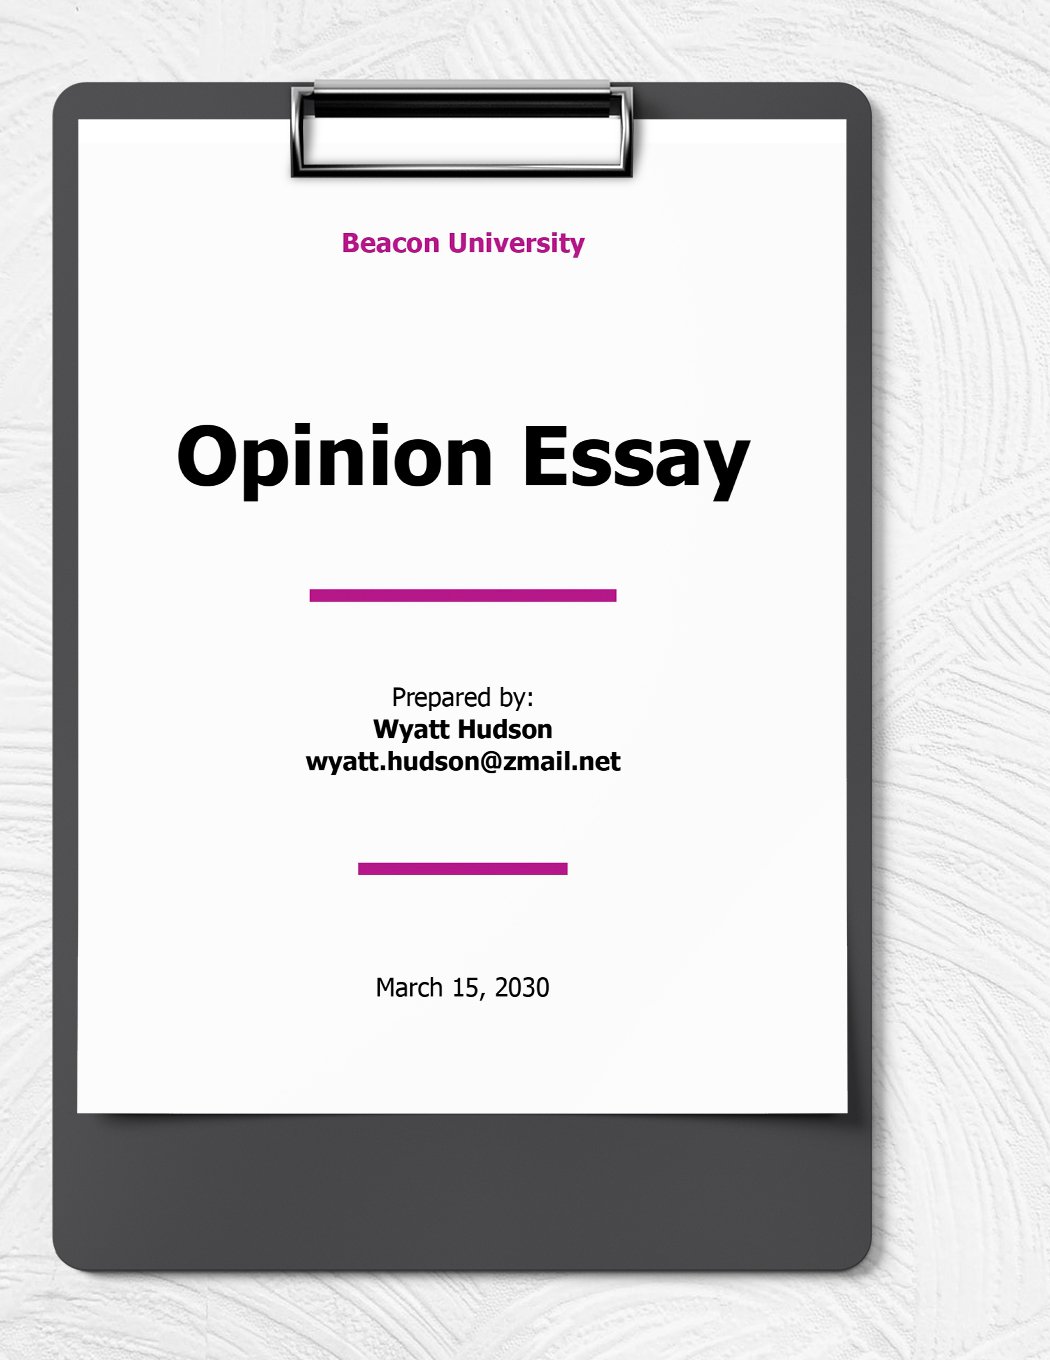 Opinion Essay Template in Word, Google Docs